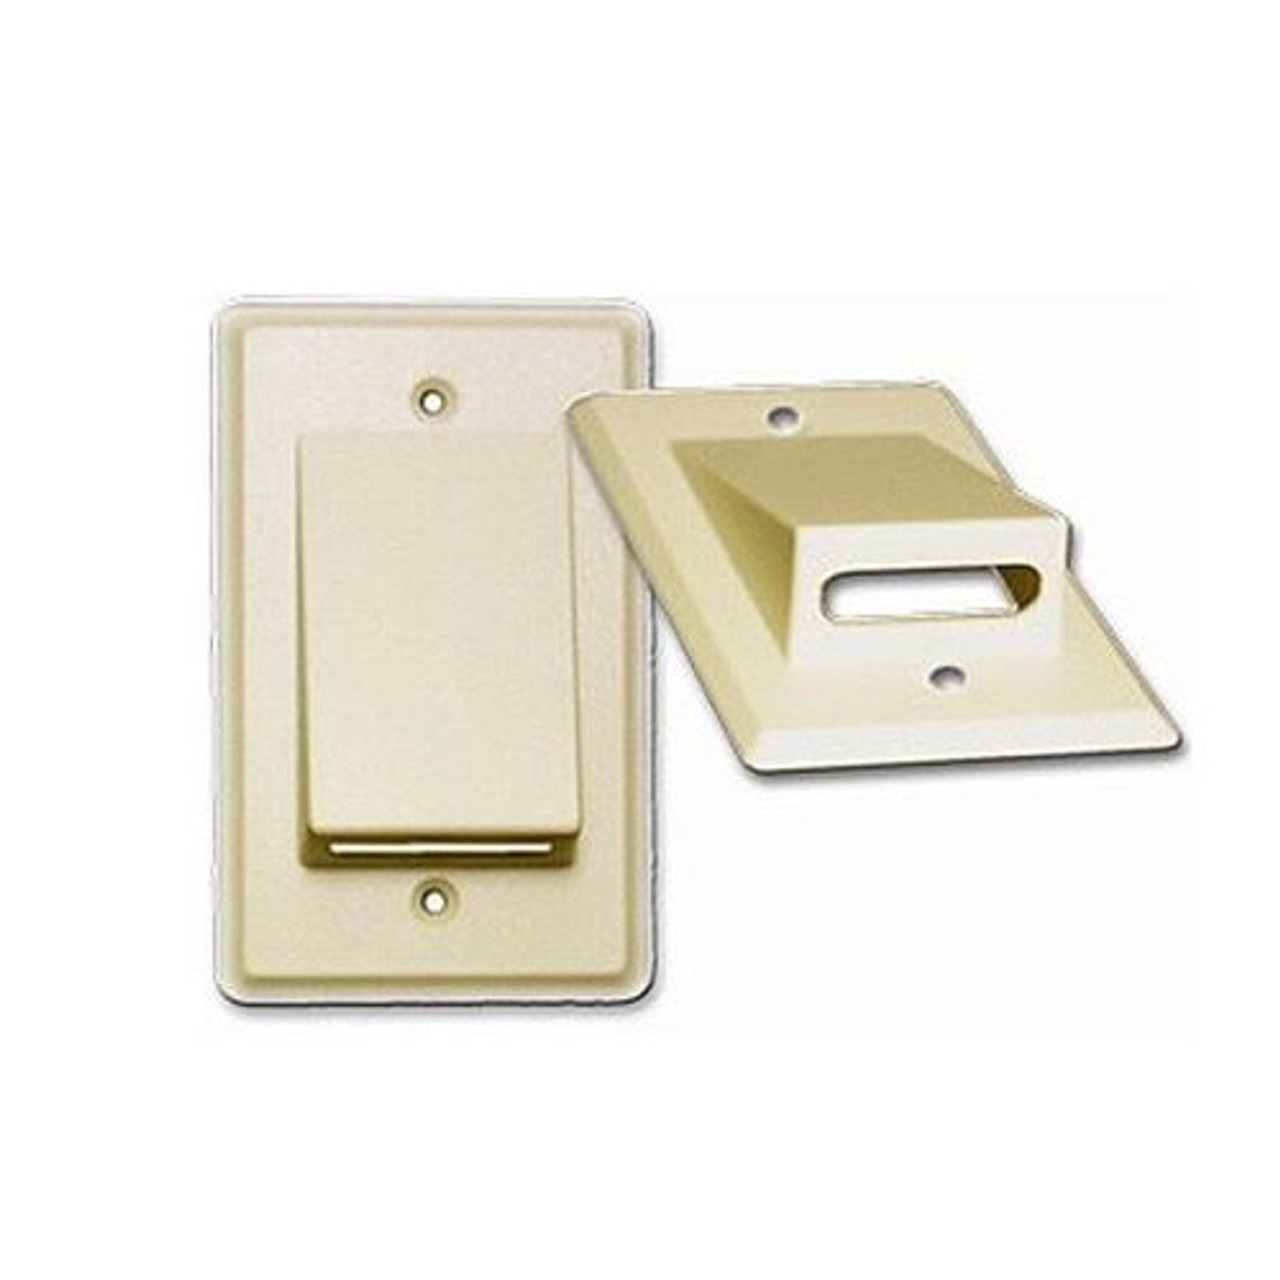 Steren 200-250IV Cable Wall Plate Ivory Single Gang Flat Ribbon Relaxed QuickPort Keystone and Multiple Flush Mount, Audio Video Data Junction Component Wide Pass-Through Opening Slot, Part # 200250-IV